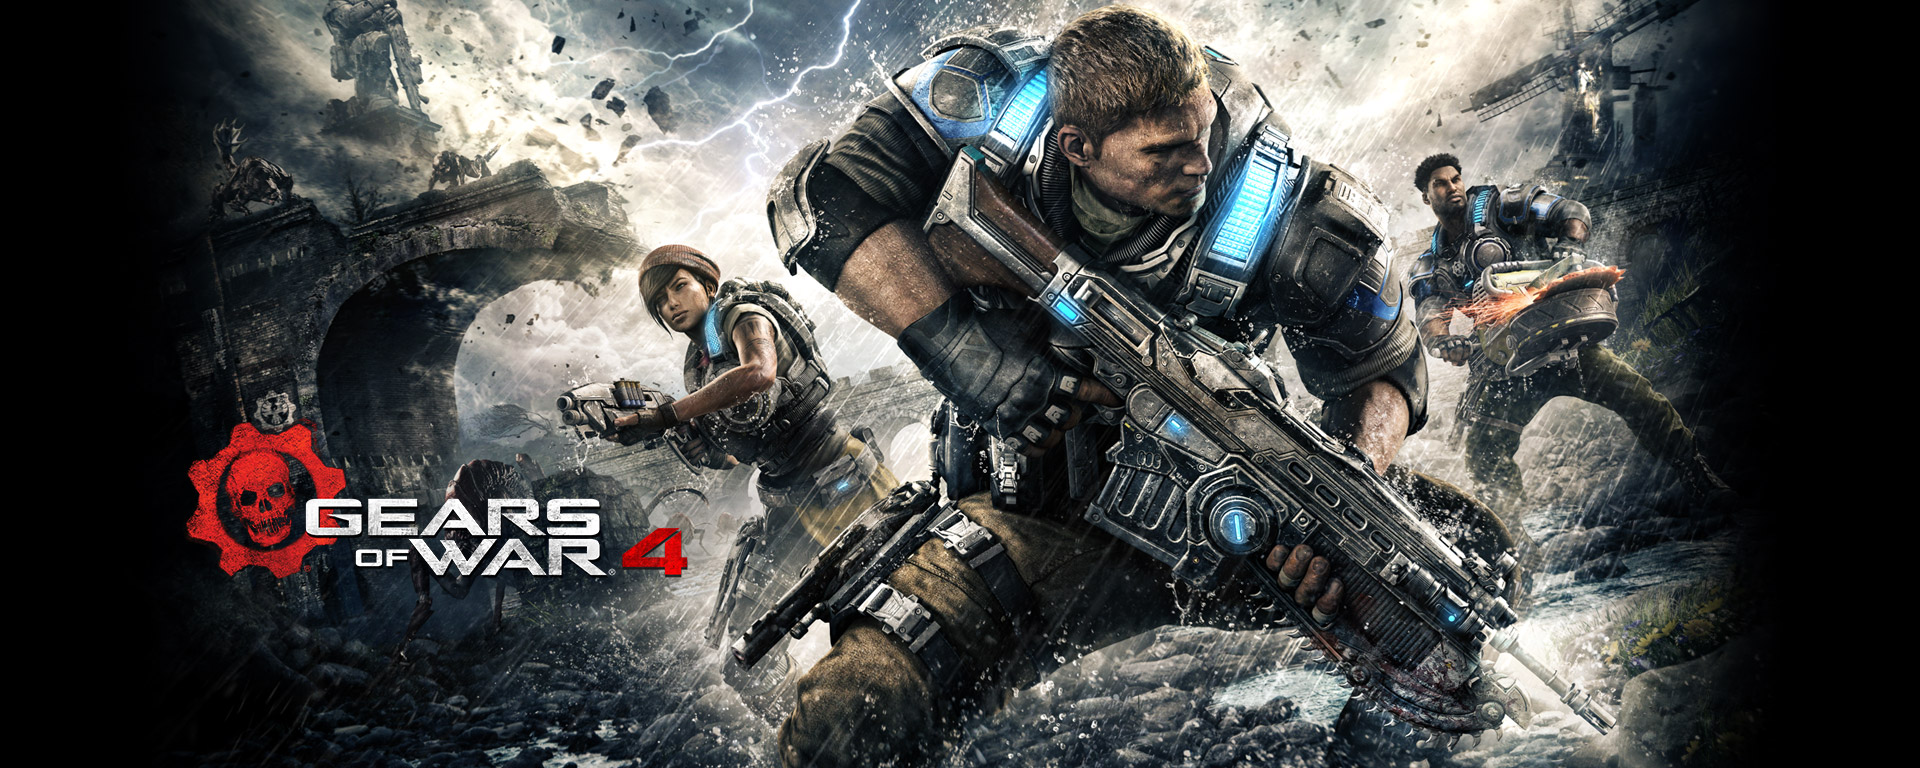 download gears of war 4 xbox 360 for free